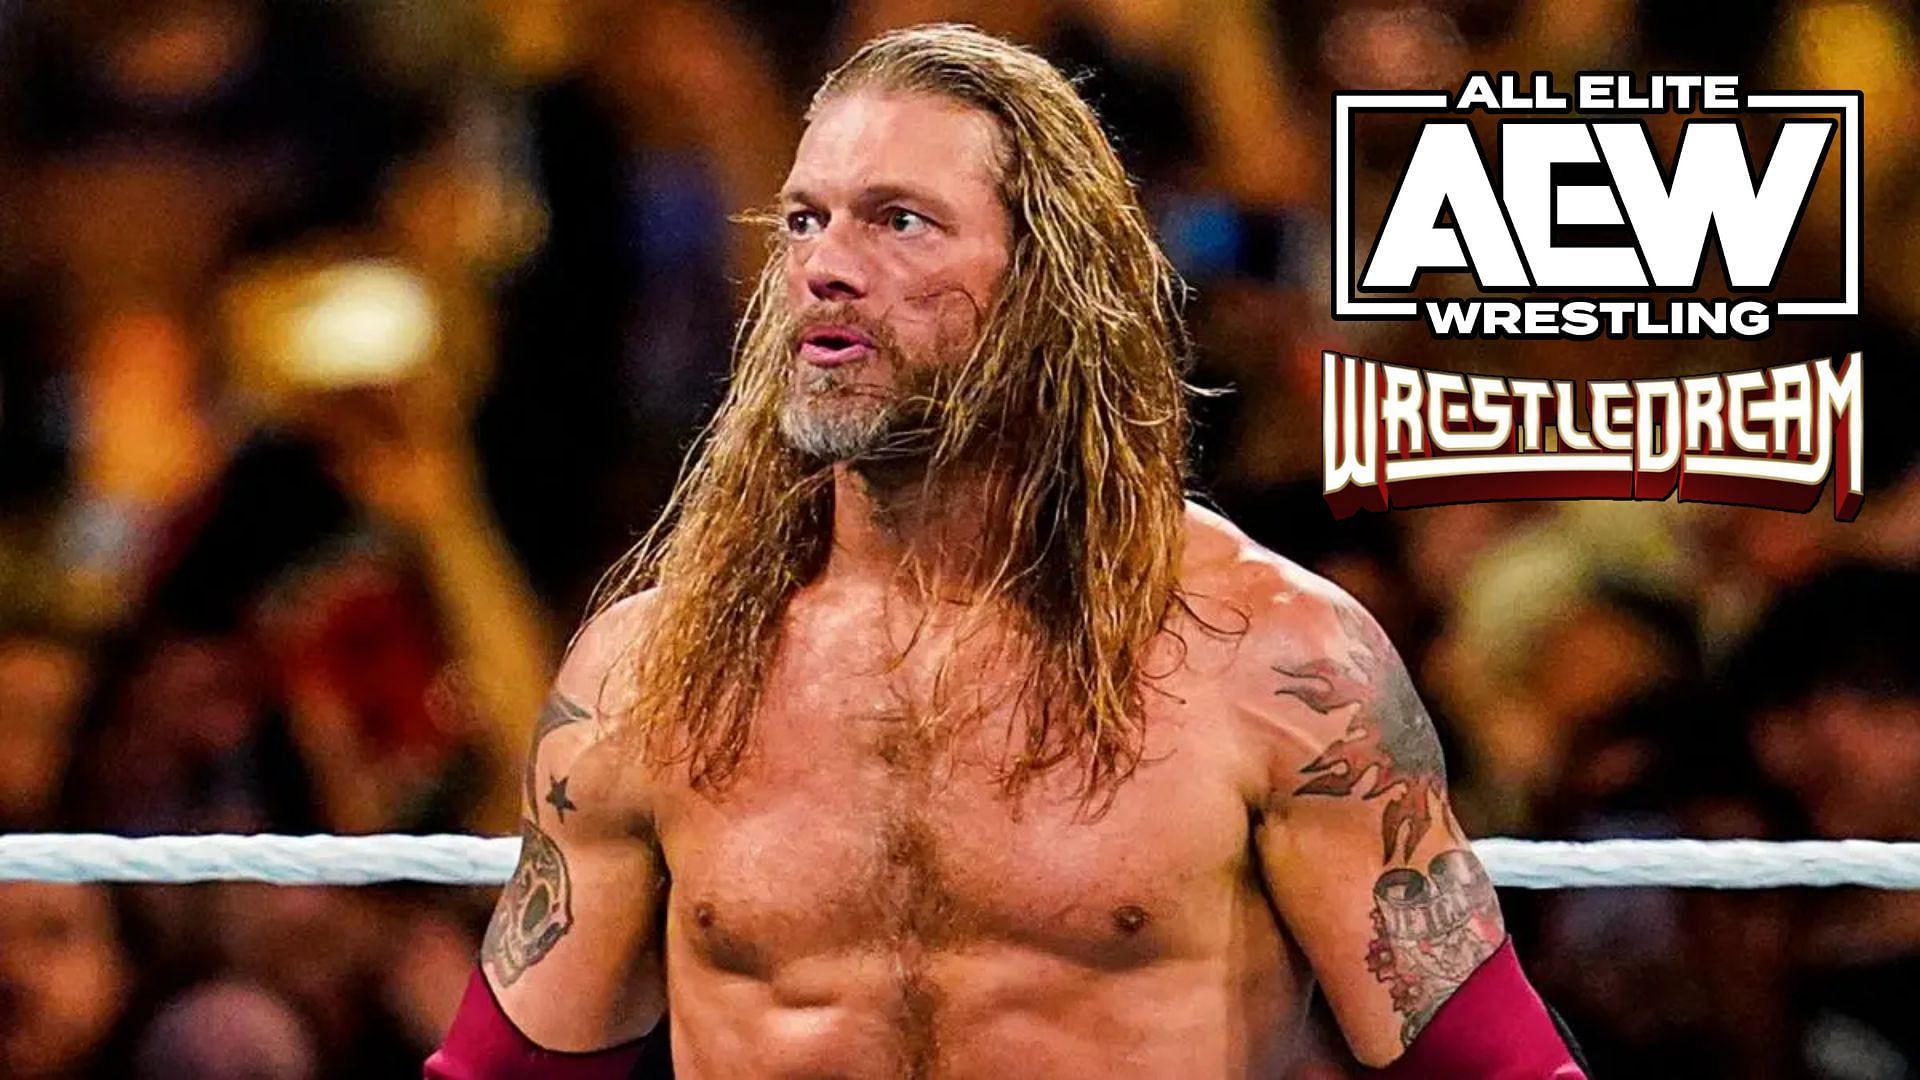 Will the Rated R Superstar be at AEW WrestleDream this weekend?